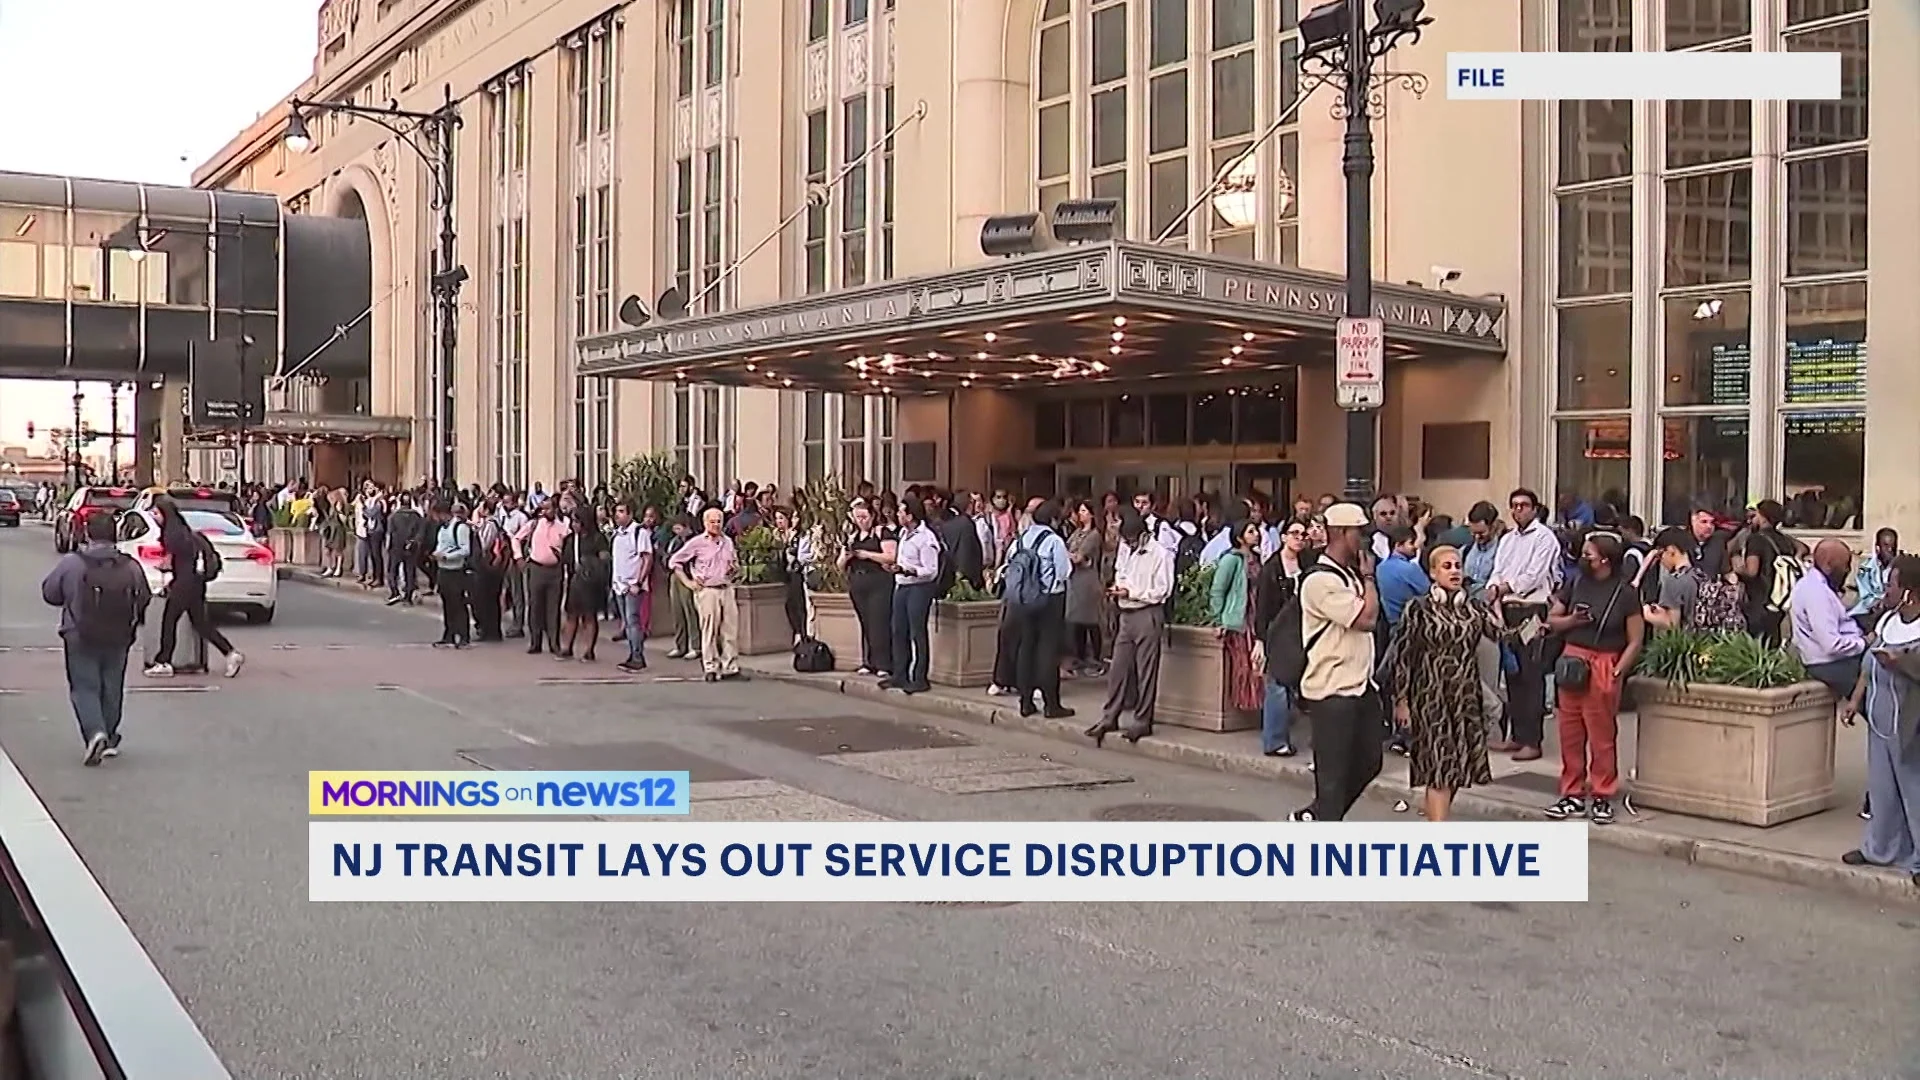 NJ Transit, Amtrak lay out service disruption initiative following Amtrak system failures in May